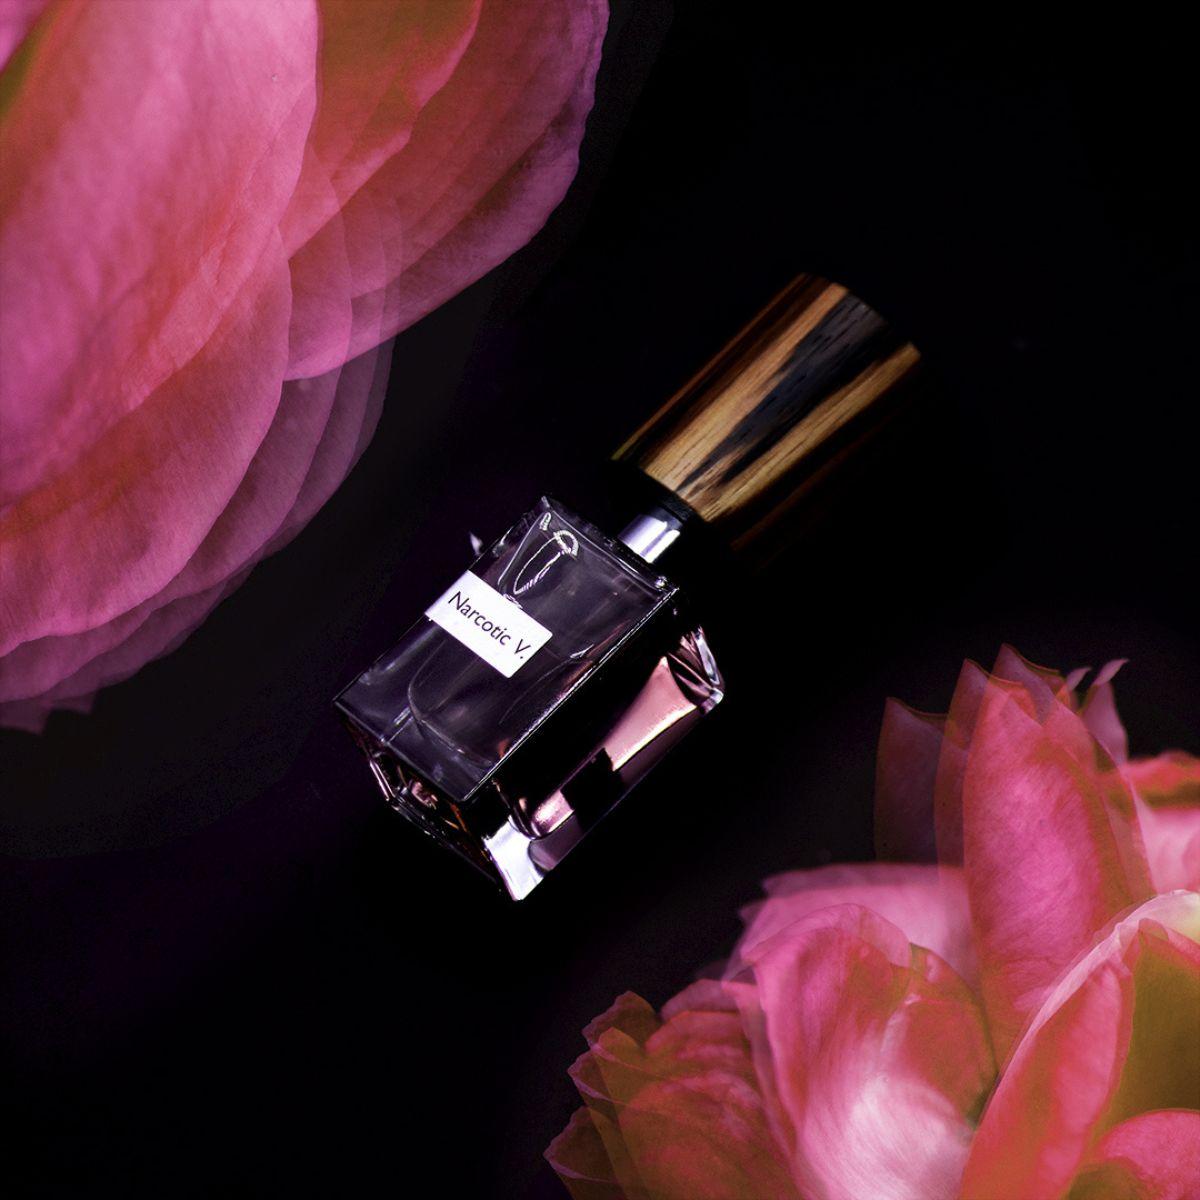 Image of Narcotic V. extrait de parfum 30 ml by the perfume brand Nasomatto